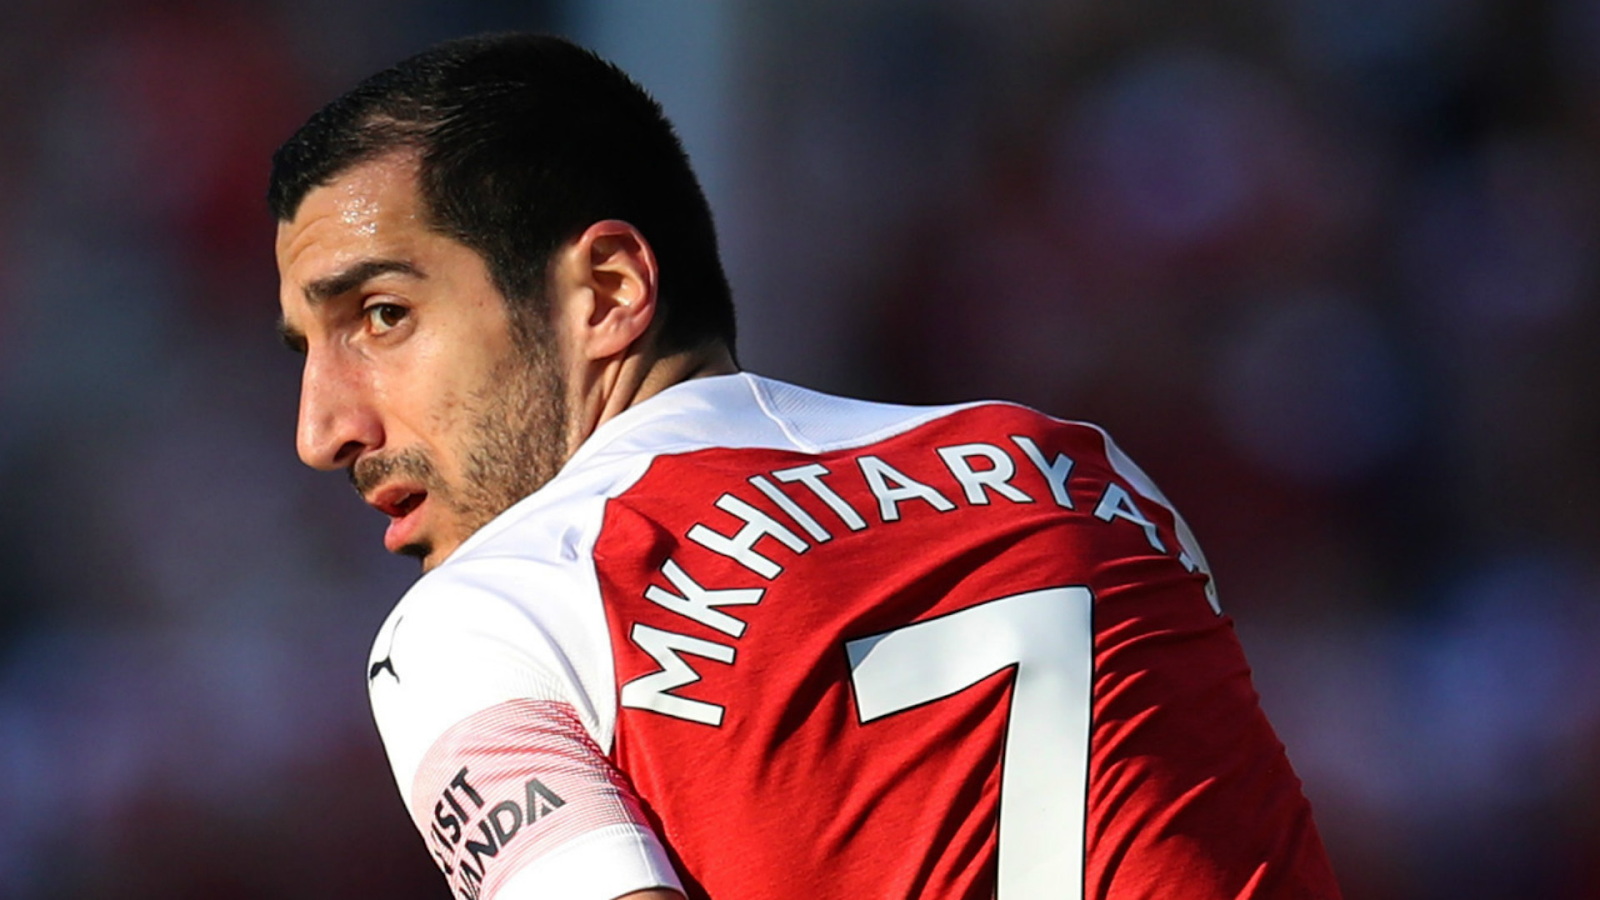 Mkhitaryan: A Versatile Wanderer with a Wand of a Left Foot